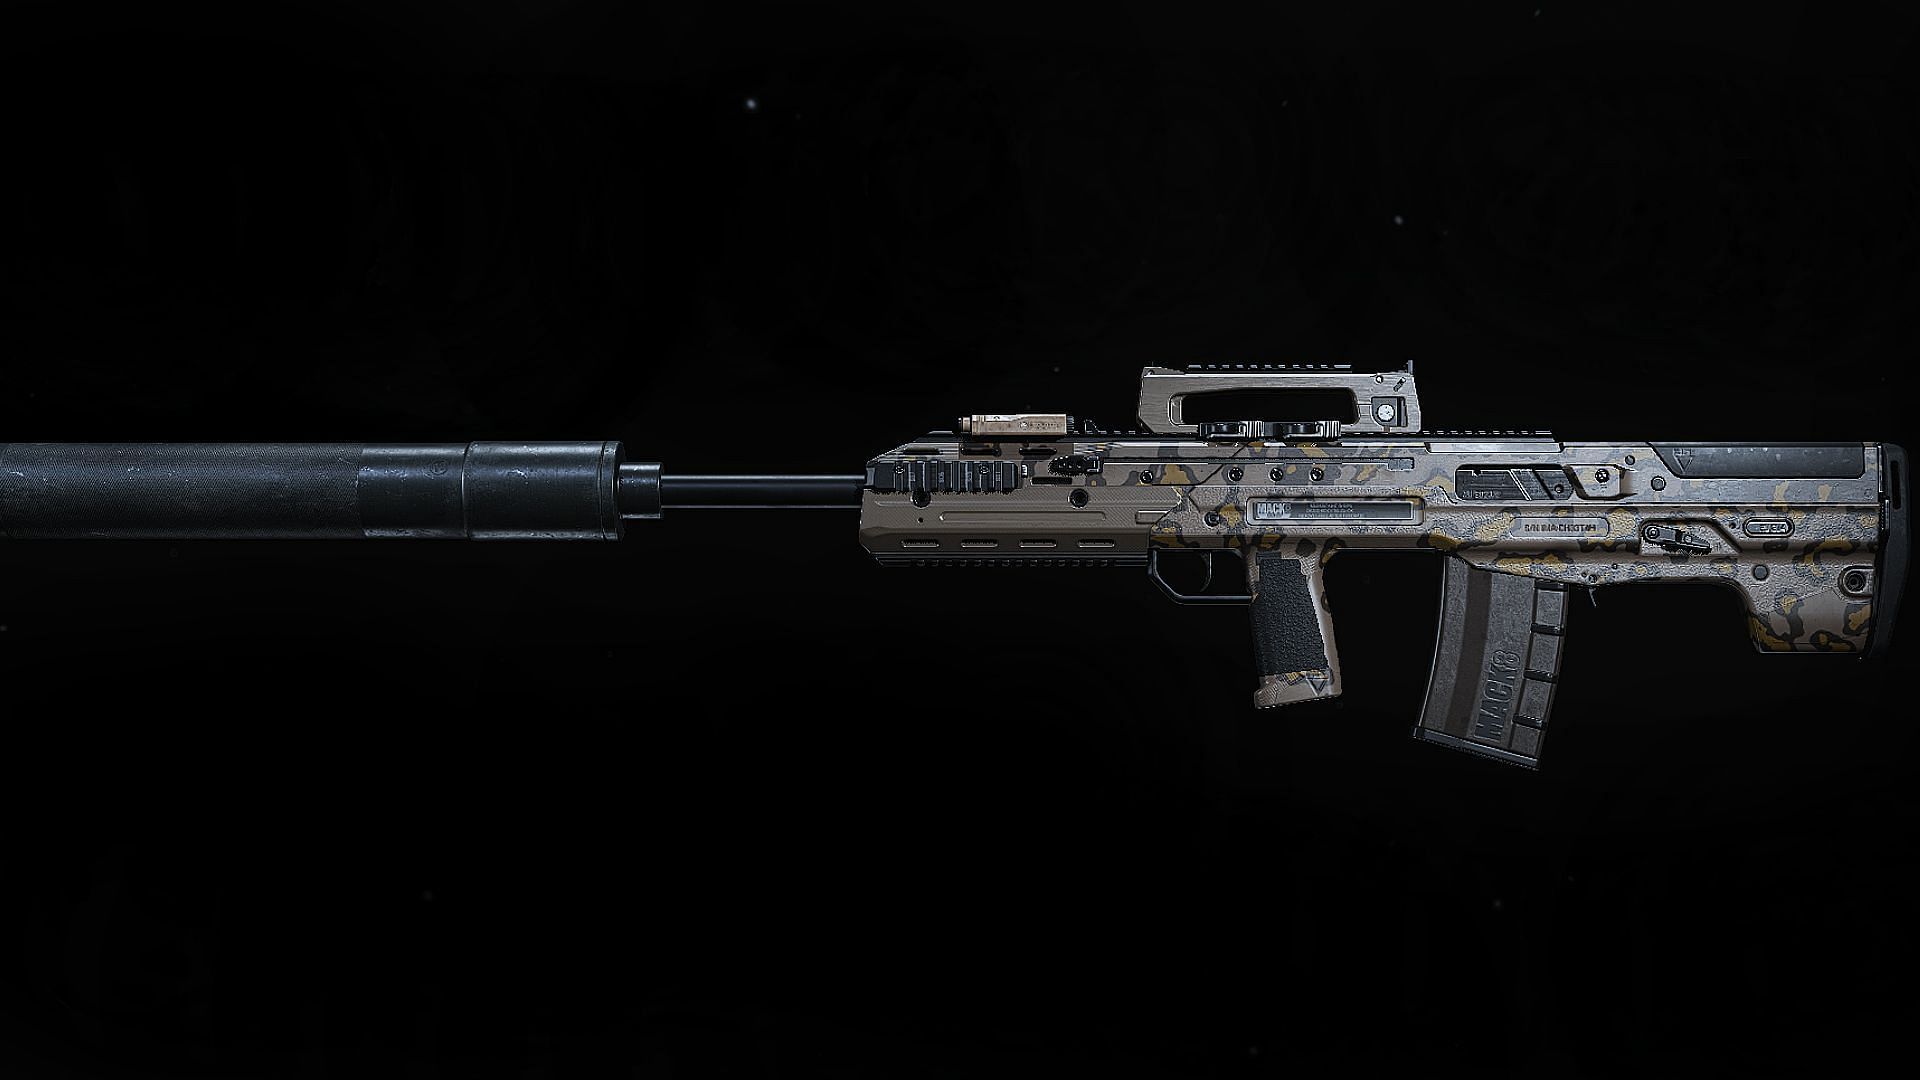 The Oden from Call of Duty Modern Warfare is coming to COD Mobile in Season 5 (Image via Activision)